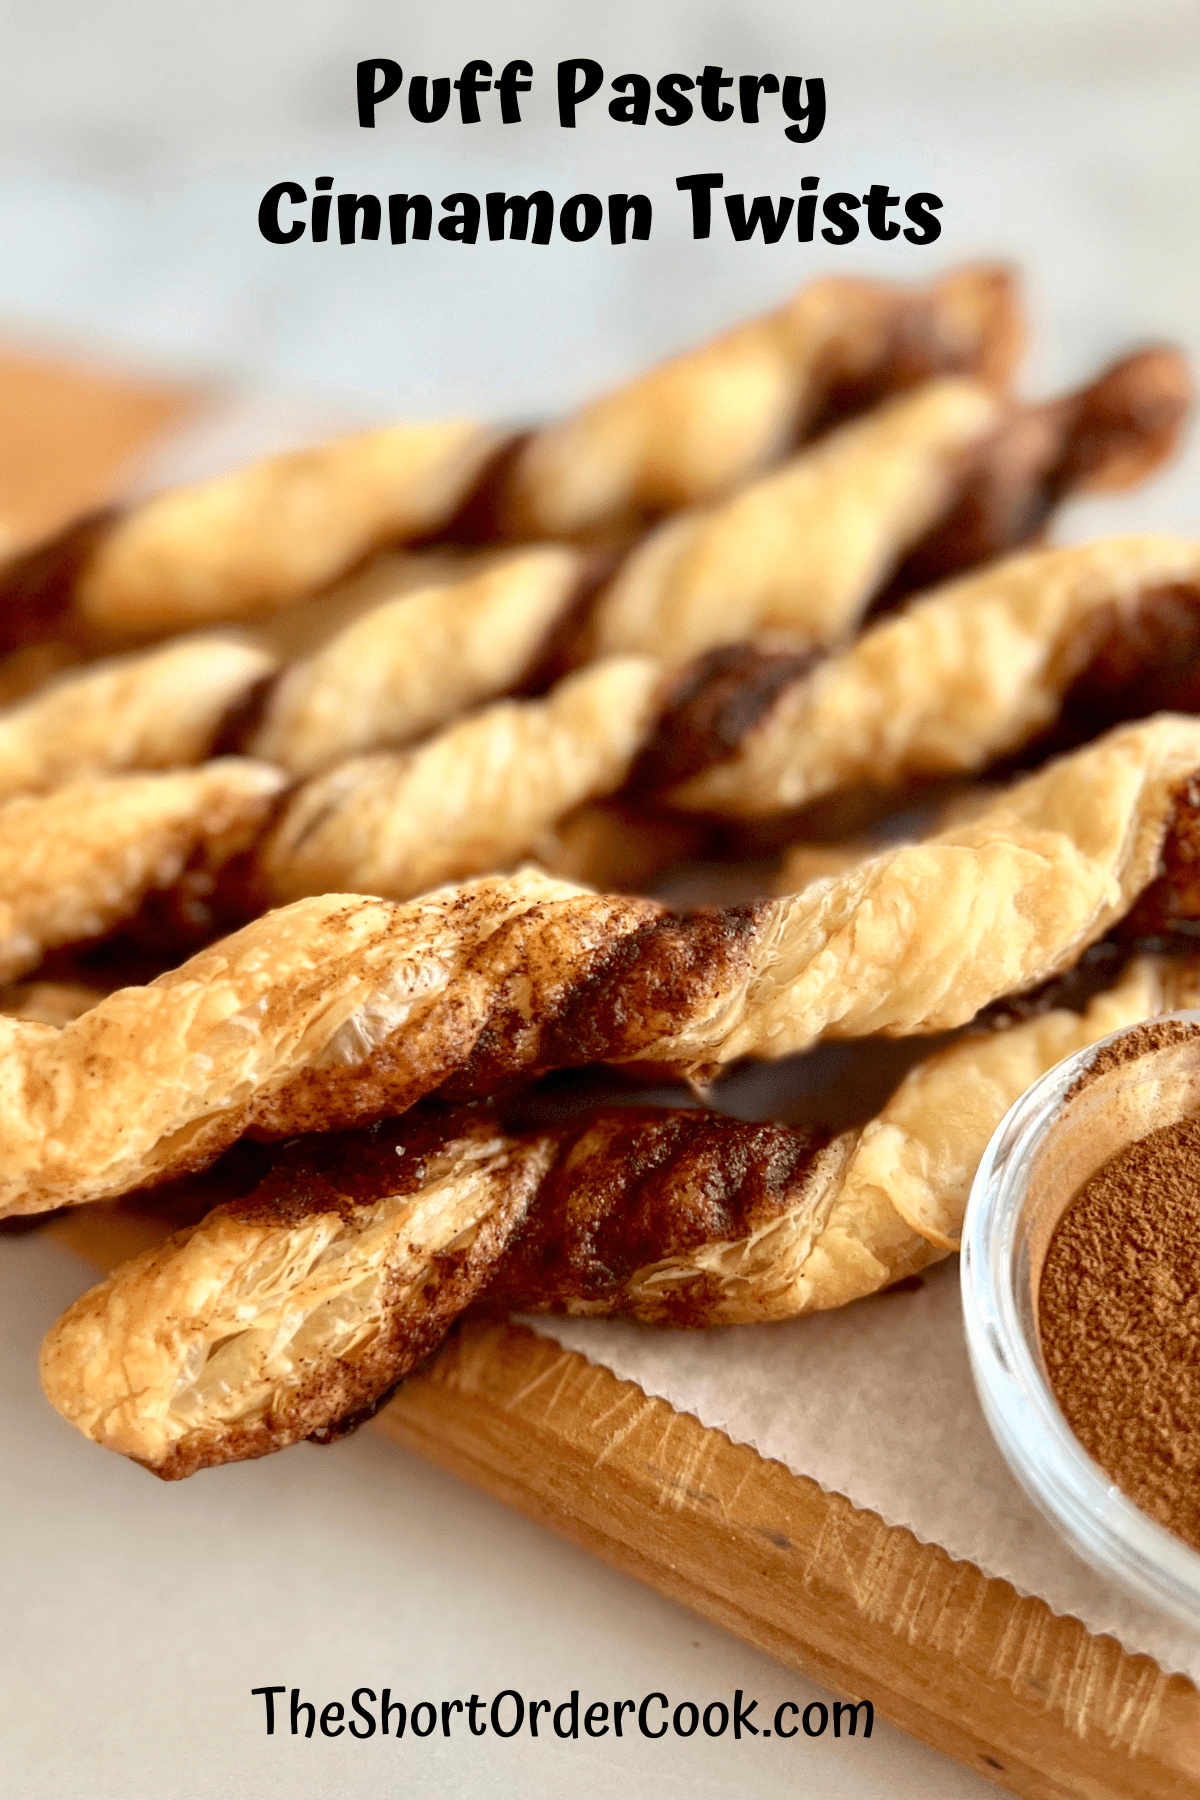 Cinnamon twists of puff pastry on a cutting board with a bowl of cinnamon.